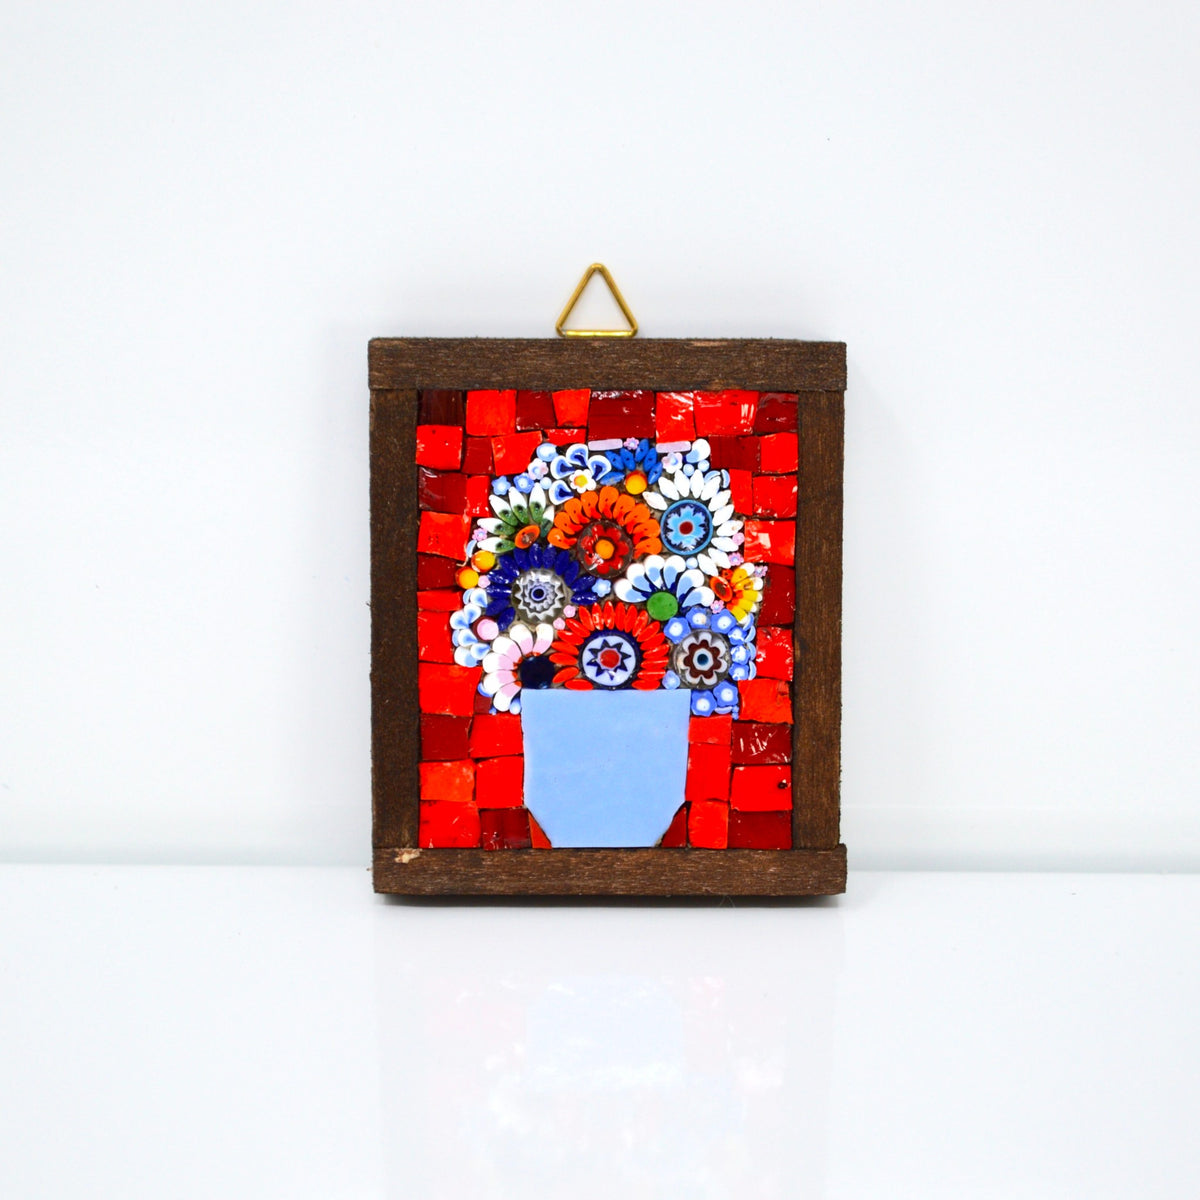 Miniature Framed Glass Floral Mosaic Art, Red, Wood Frame, Made in Italy - My Italian Decor